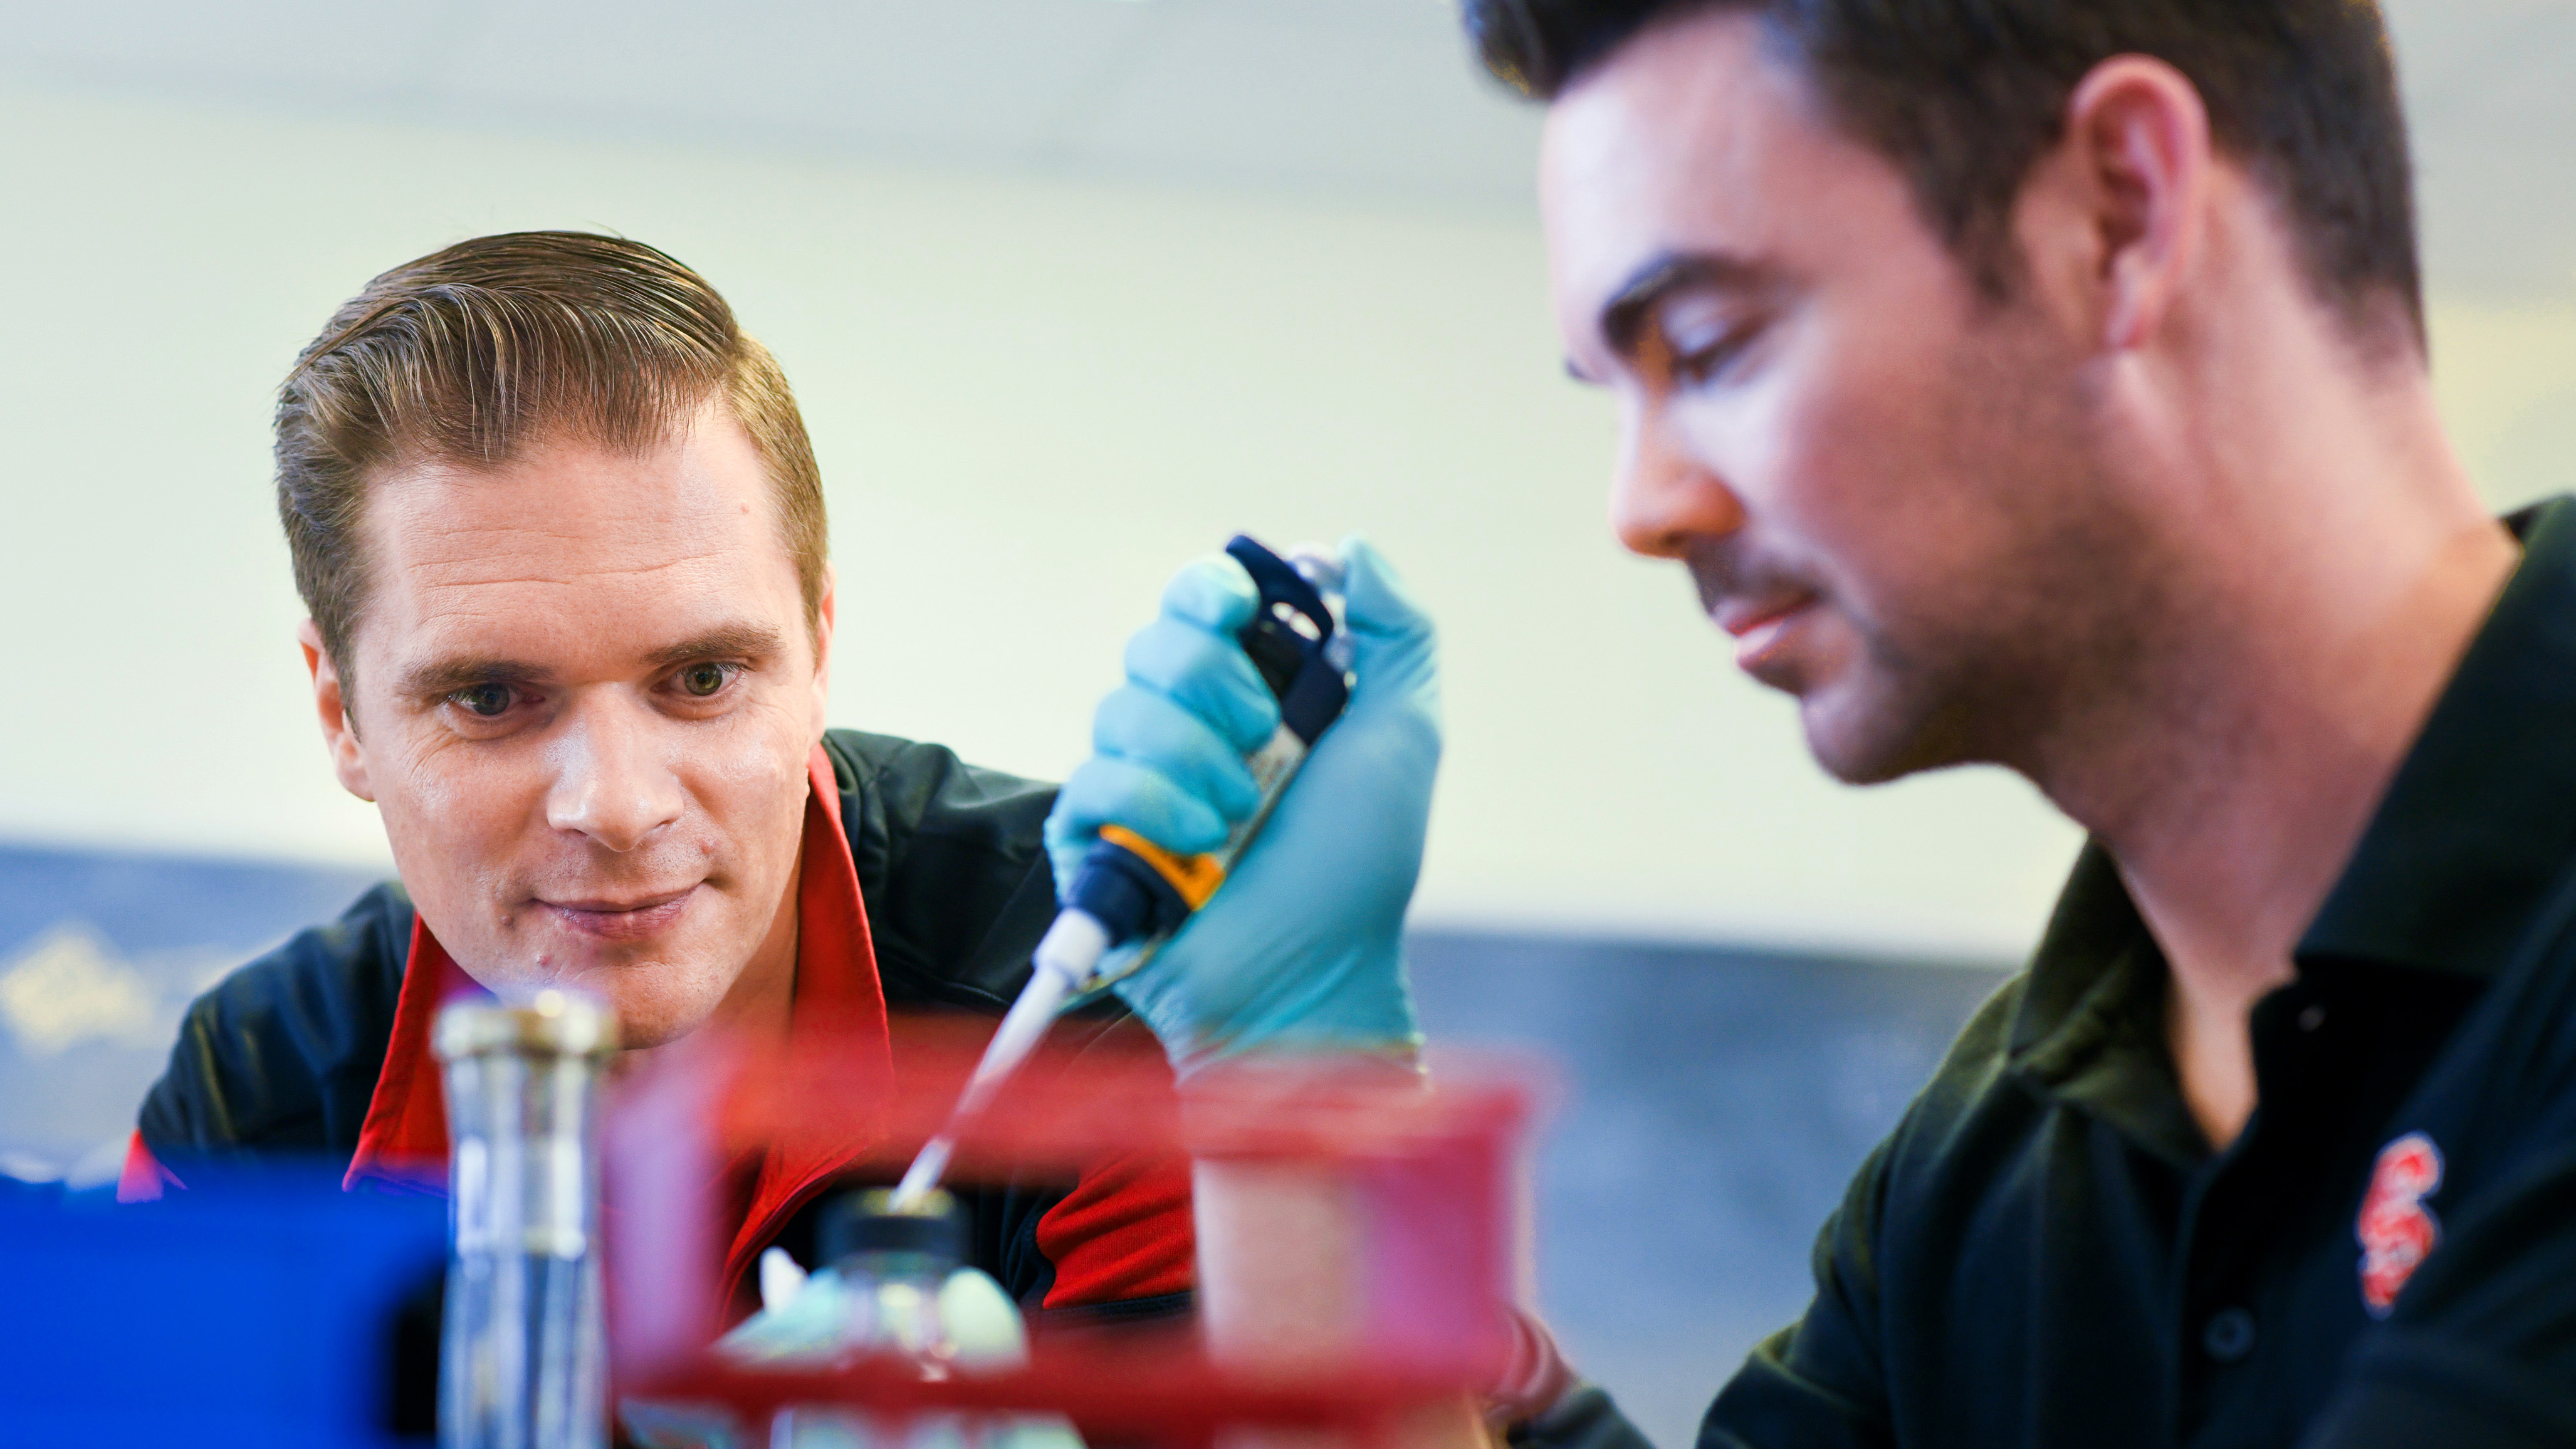 Rodolphe Barrangou supervises a graduate student in their NC State lab